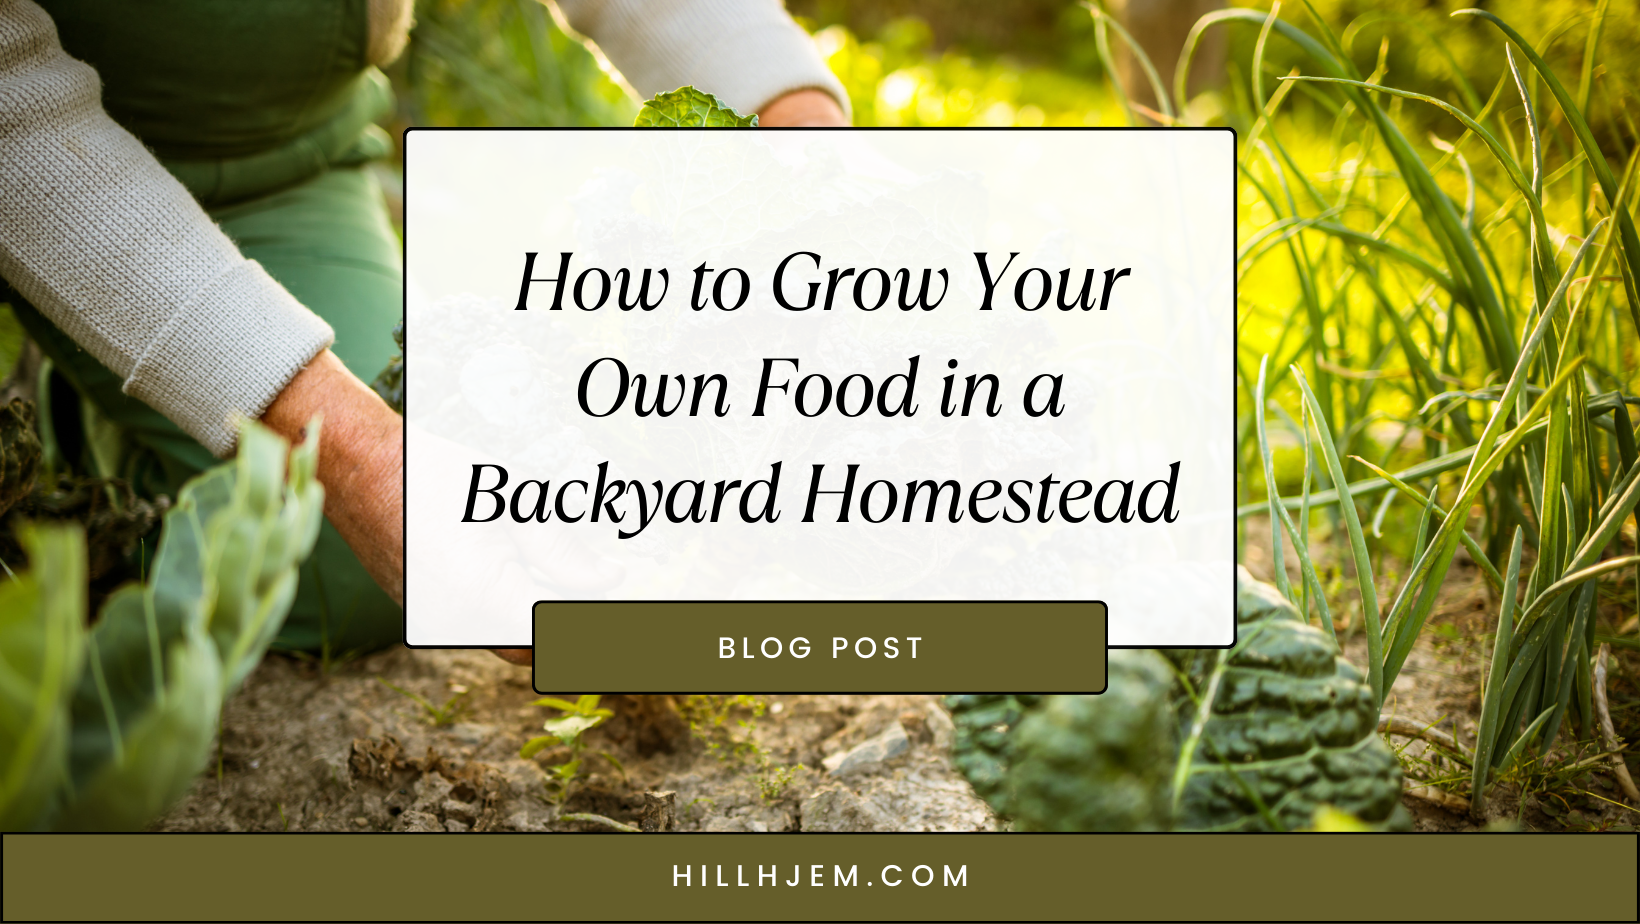 How to Grow Your Own Food in a Backyard Homestead